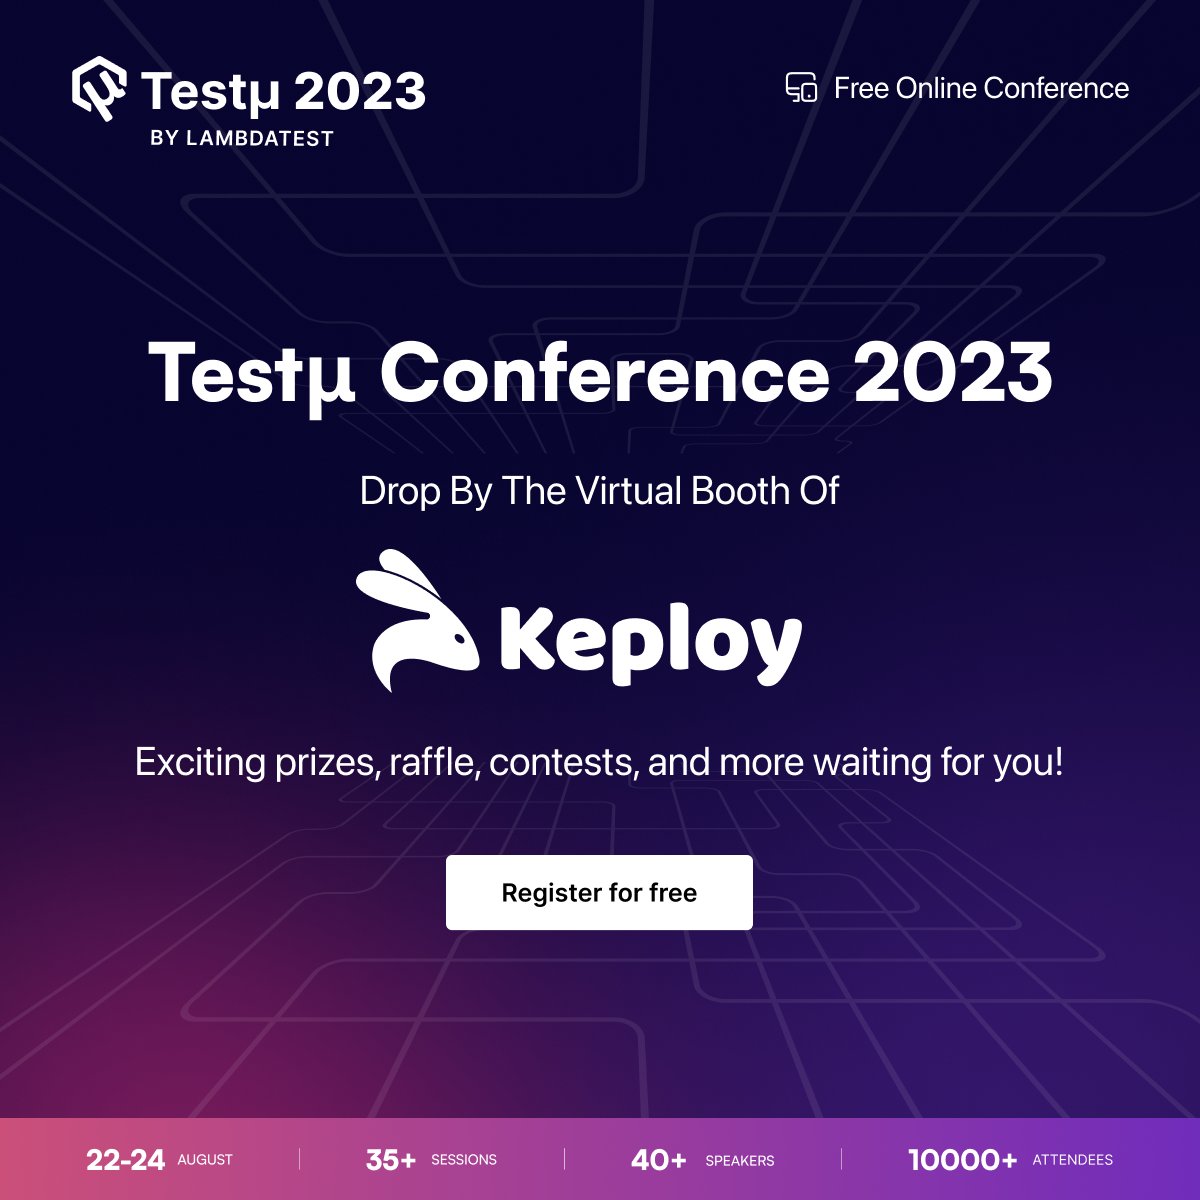 We are delighted to announce that Keploy 🐰 is partnering with @lambdatesting for #TestMuConf 2023. 🚀

Mark your calendars from 22-24 August and drop by our booth to learn more about our products and services also, get a chance to win some exciting #giveaways. 🎉